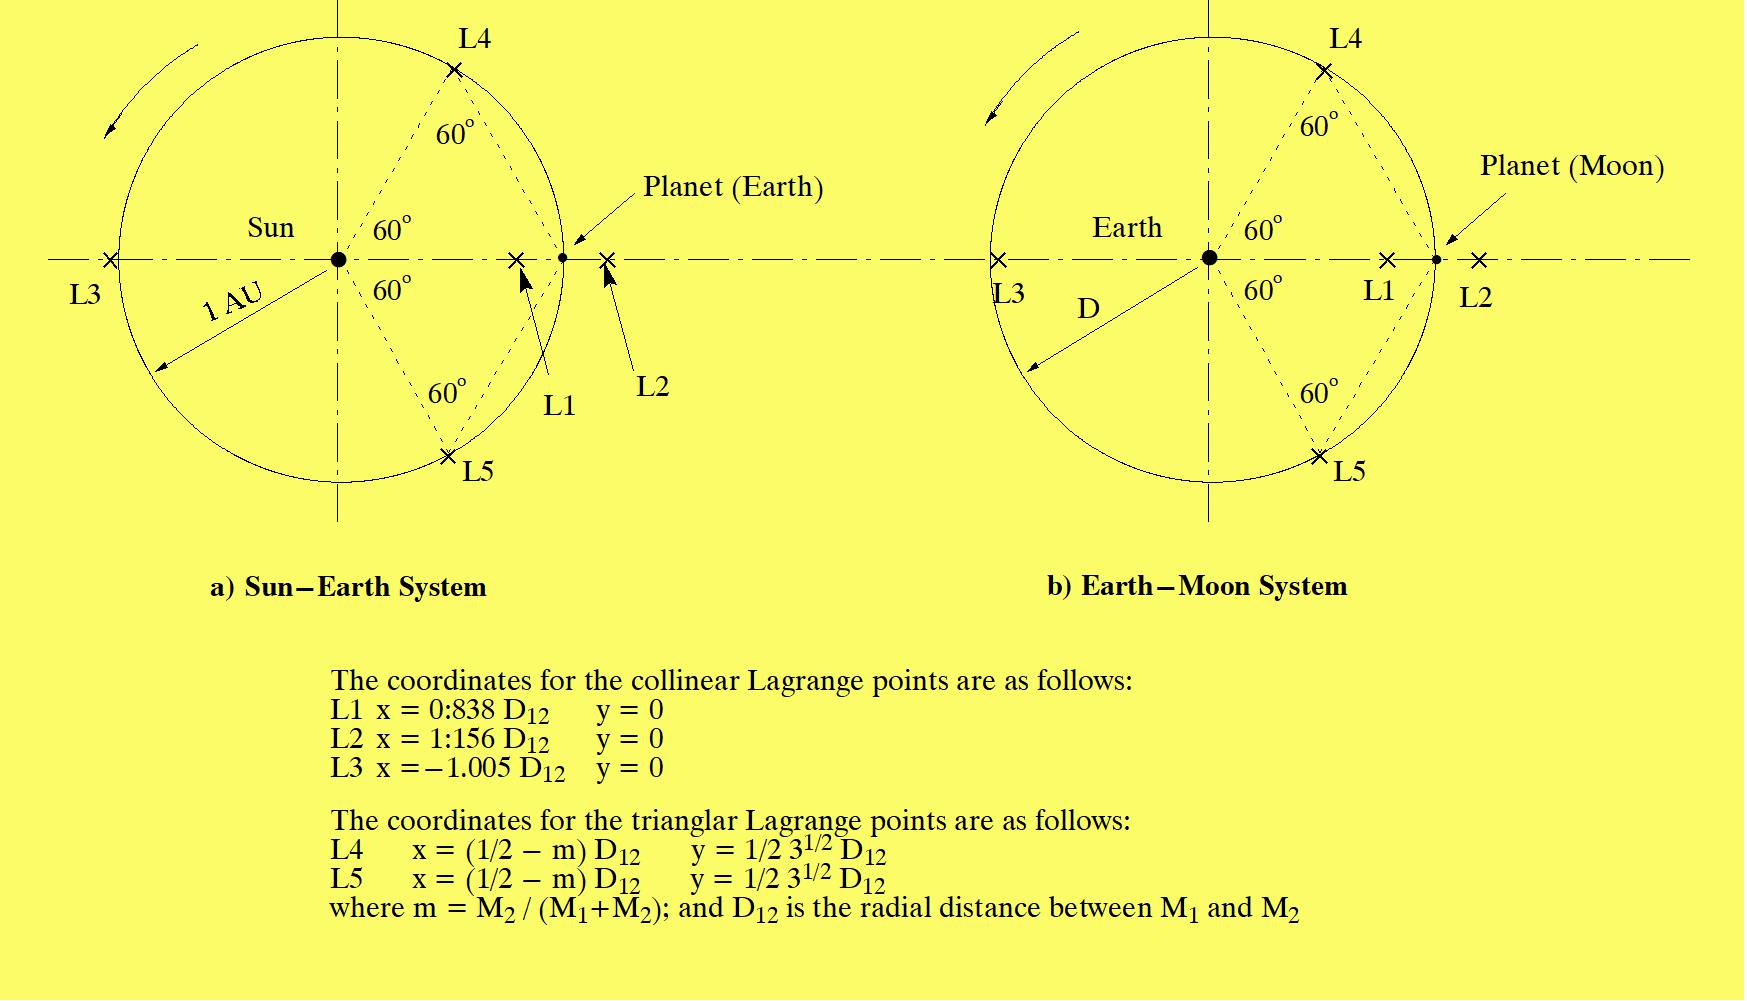 Figure 63: Lagrangian points of the Sun-Earth and Earth-Moon systems